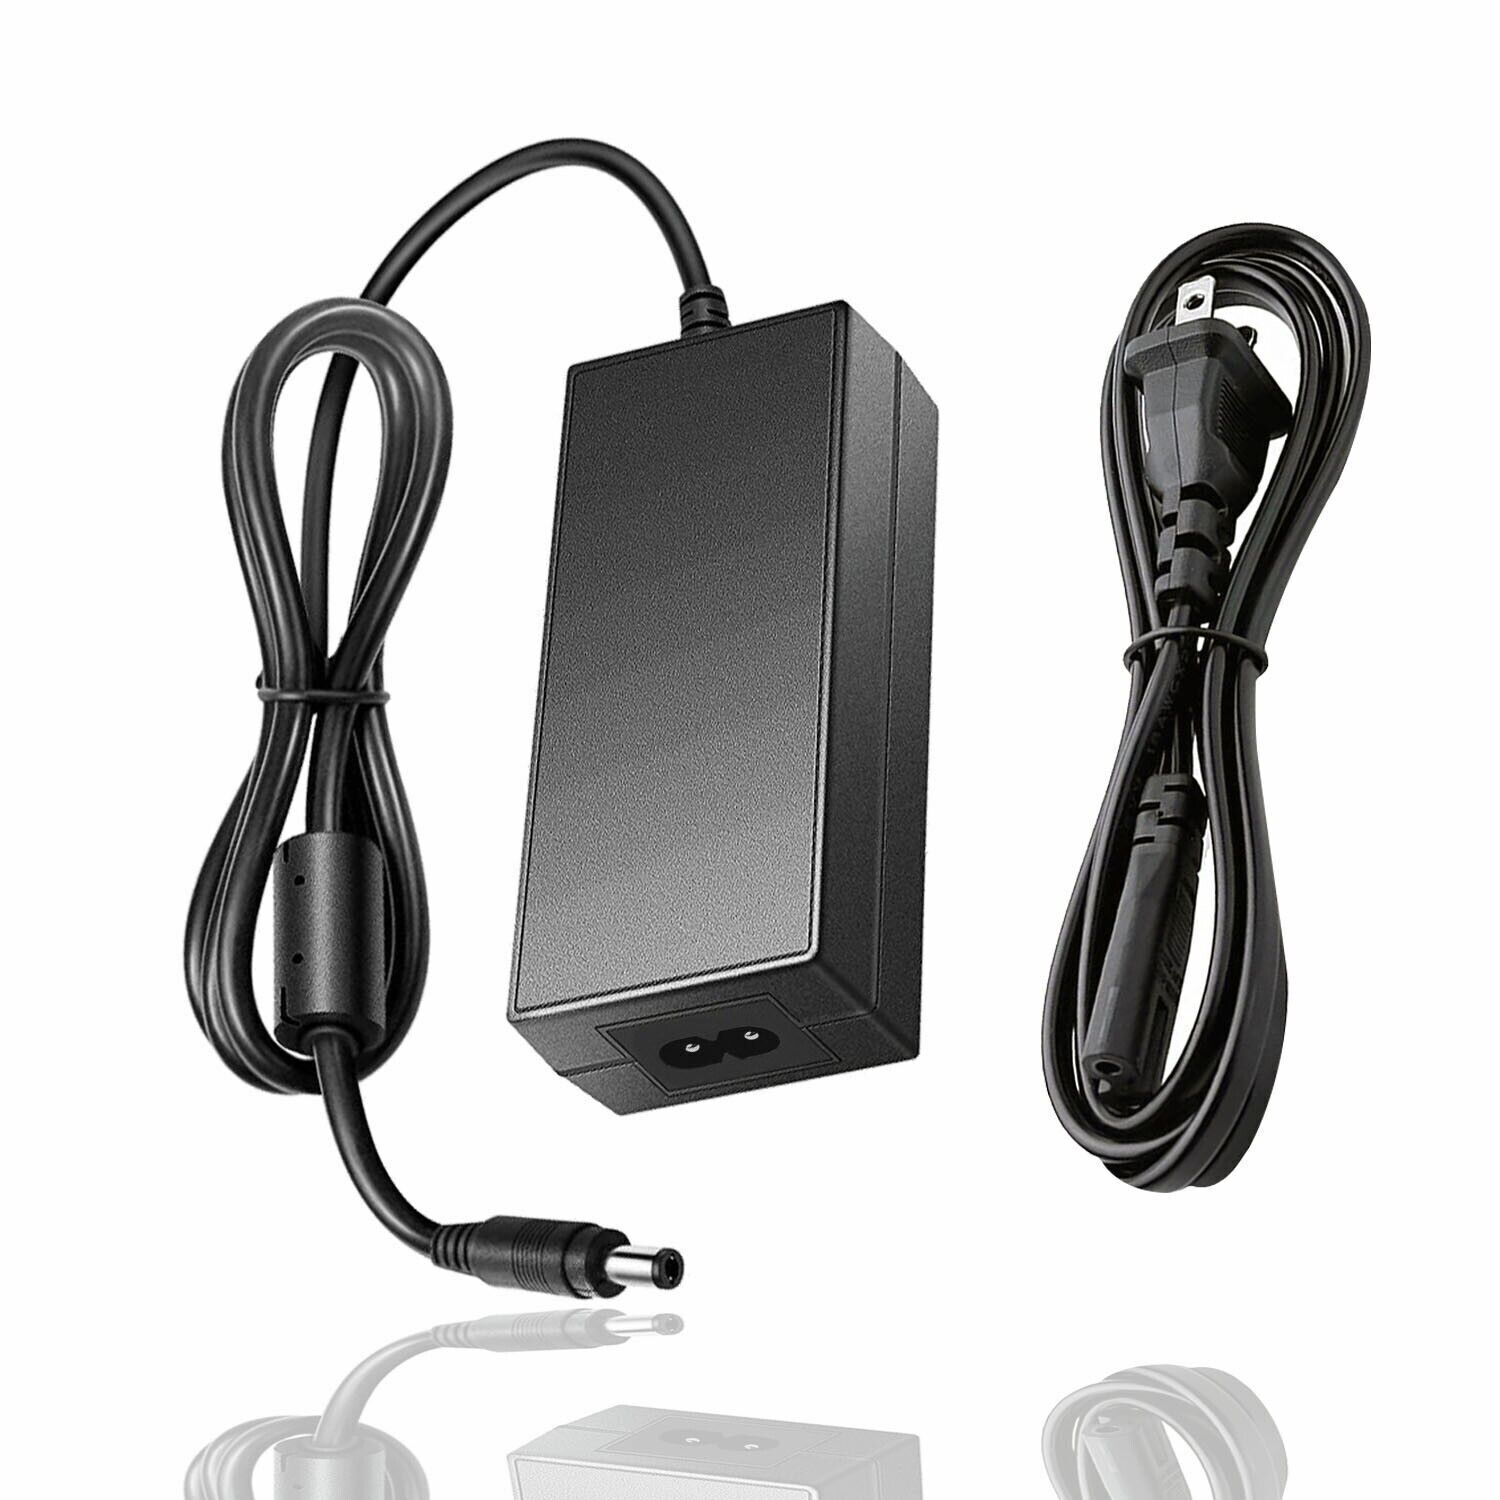 AC Adapter for HP 135W Smart Ac Adapter.Requires separate 3-wire AC power cord